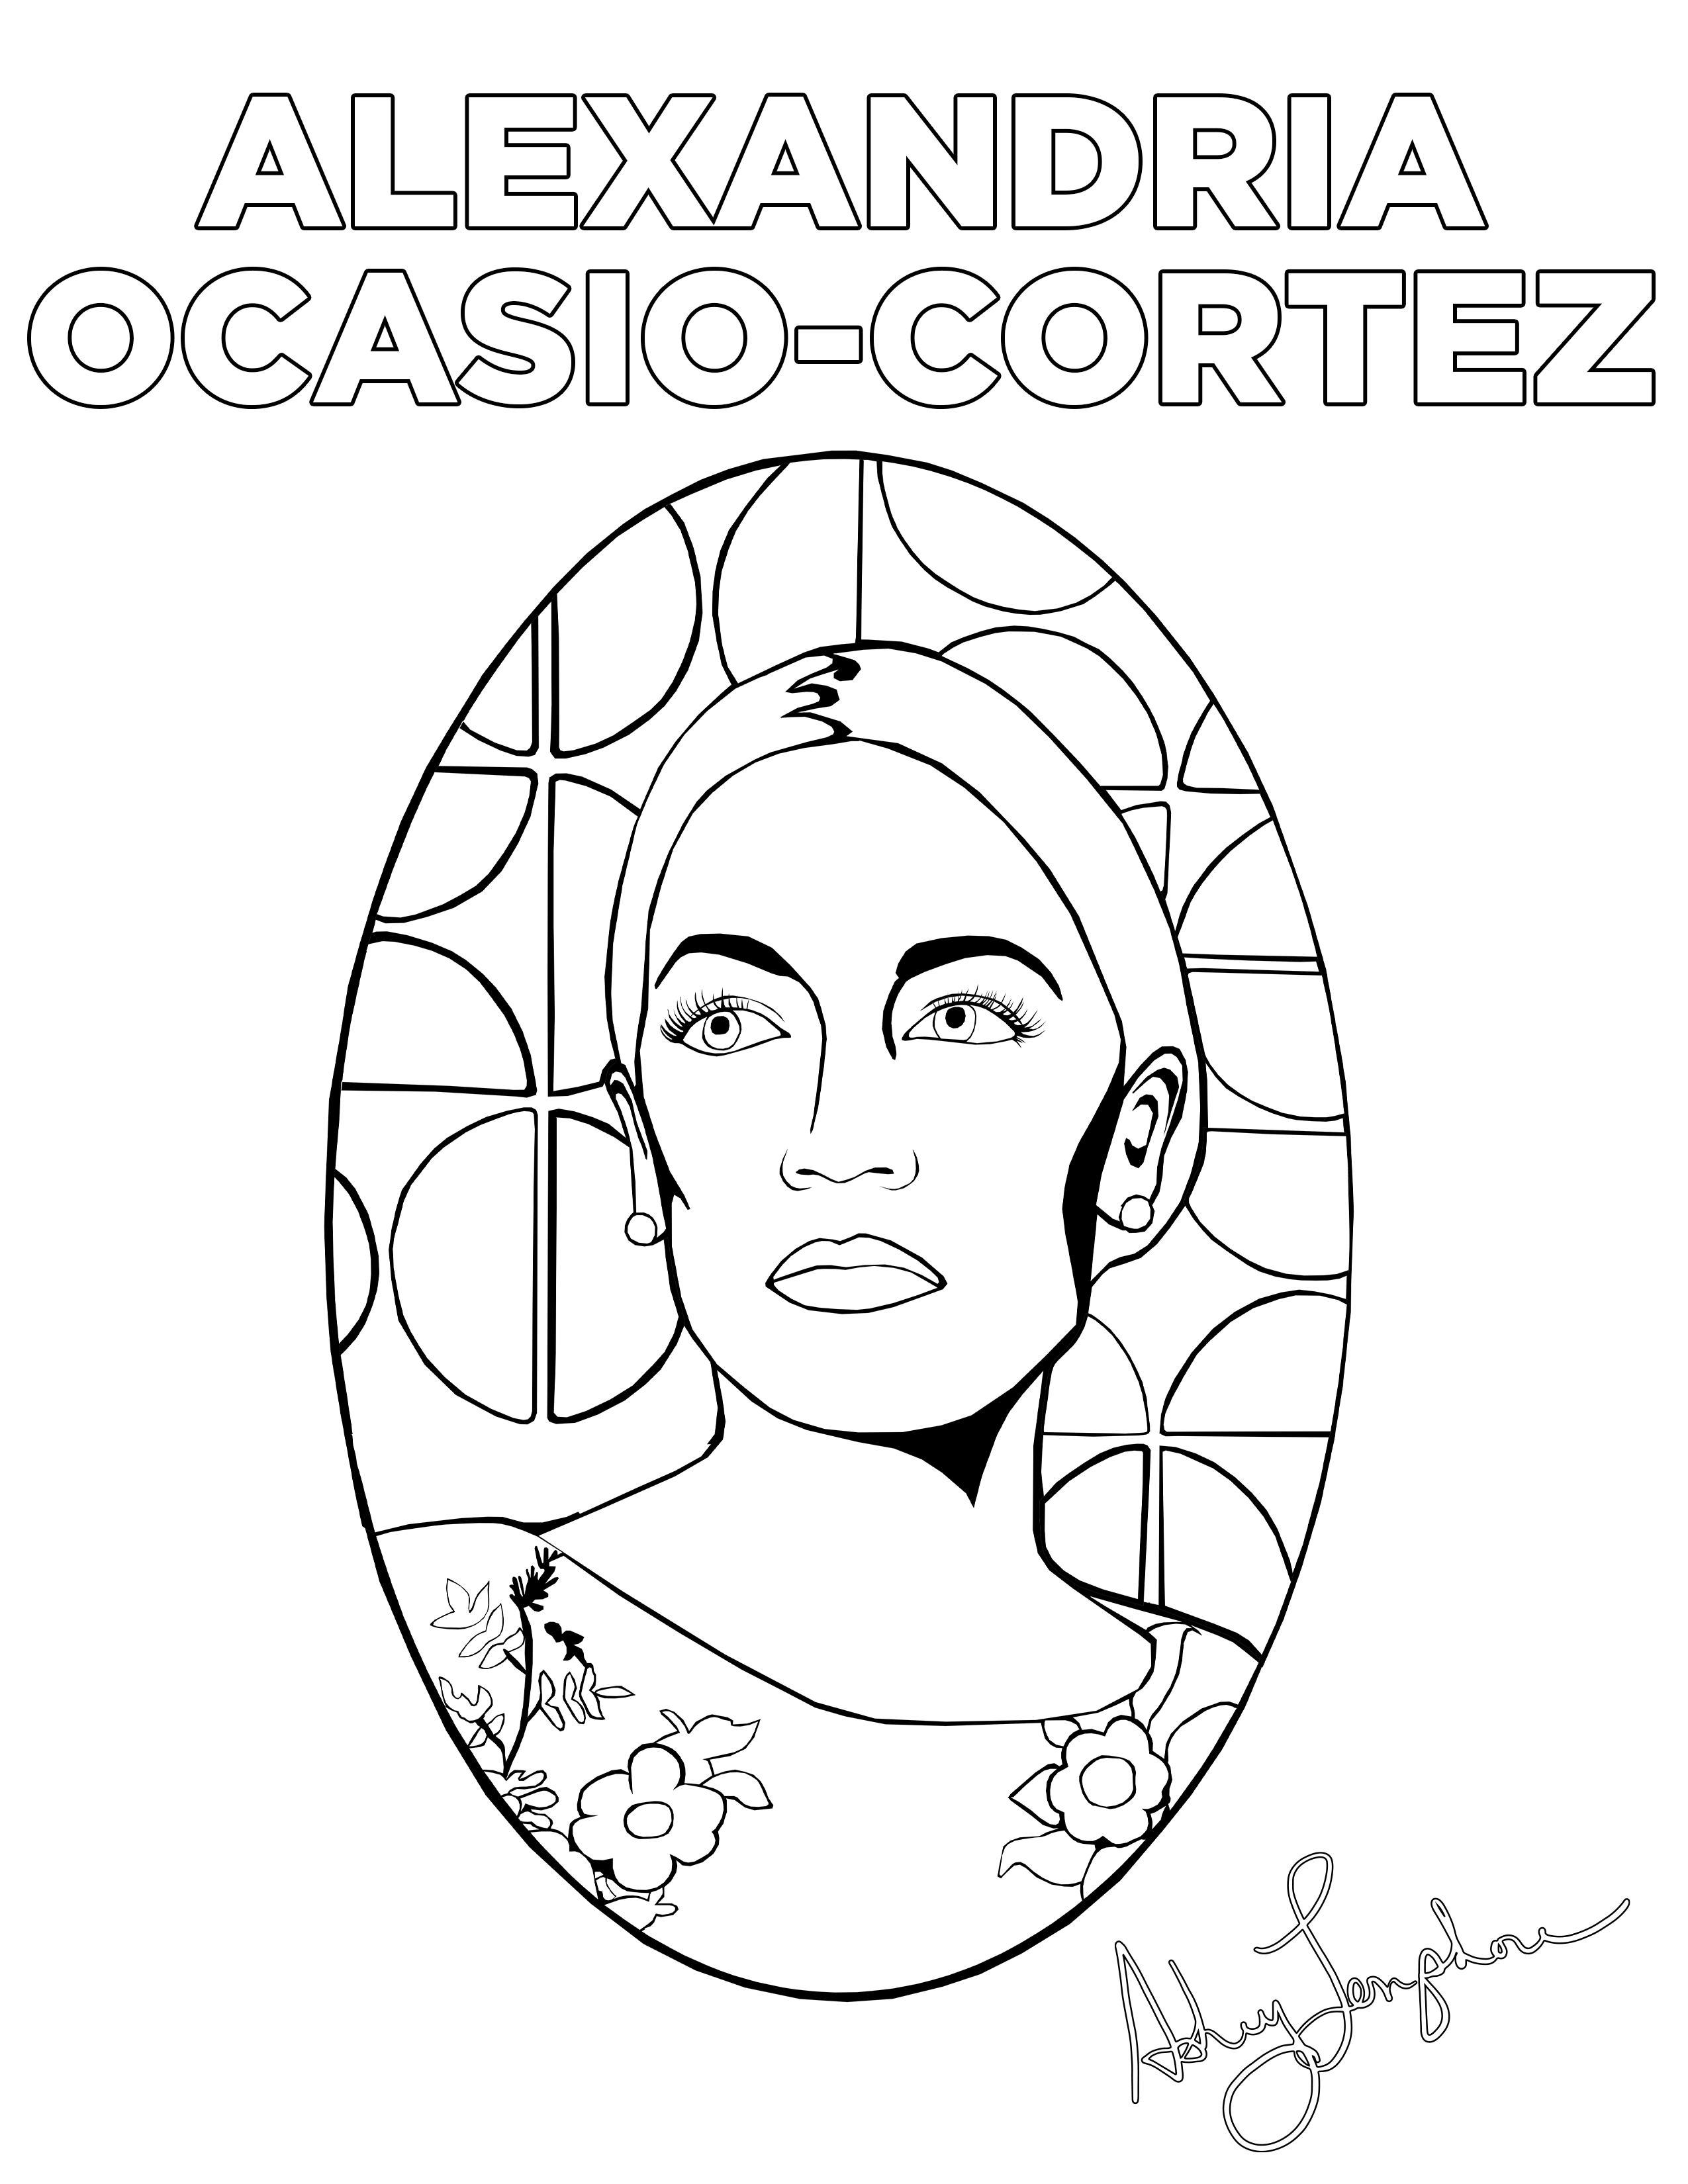 Ashley Longshore coloring pages featuring Alexandria Ocasio-Cortez.